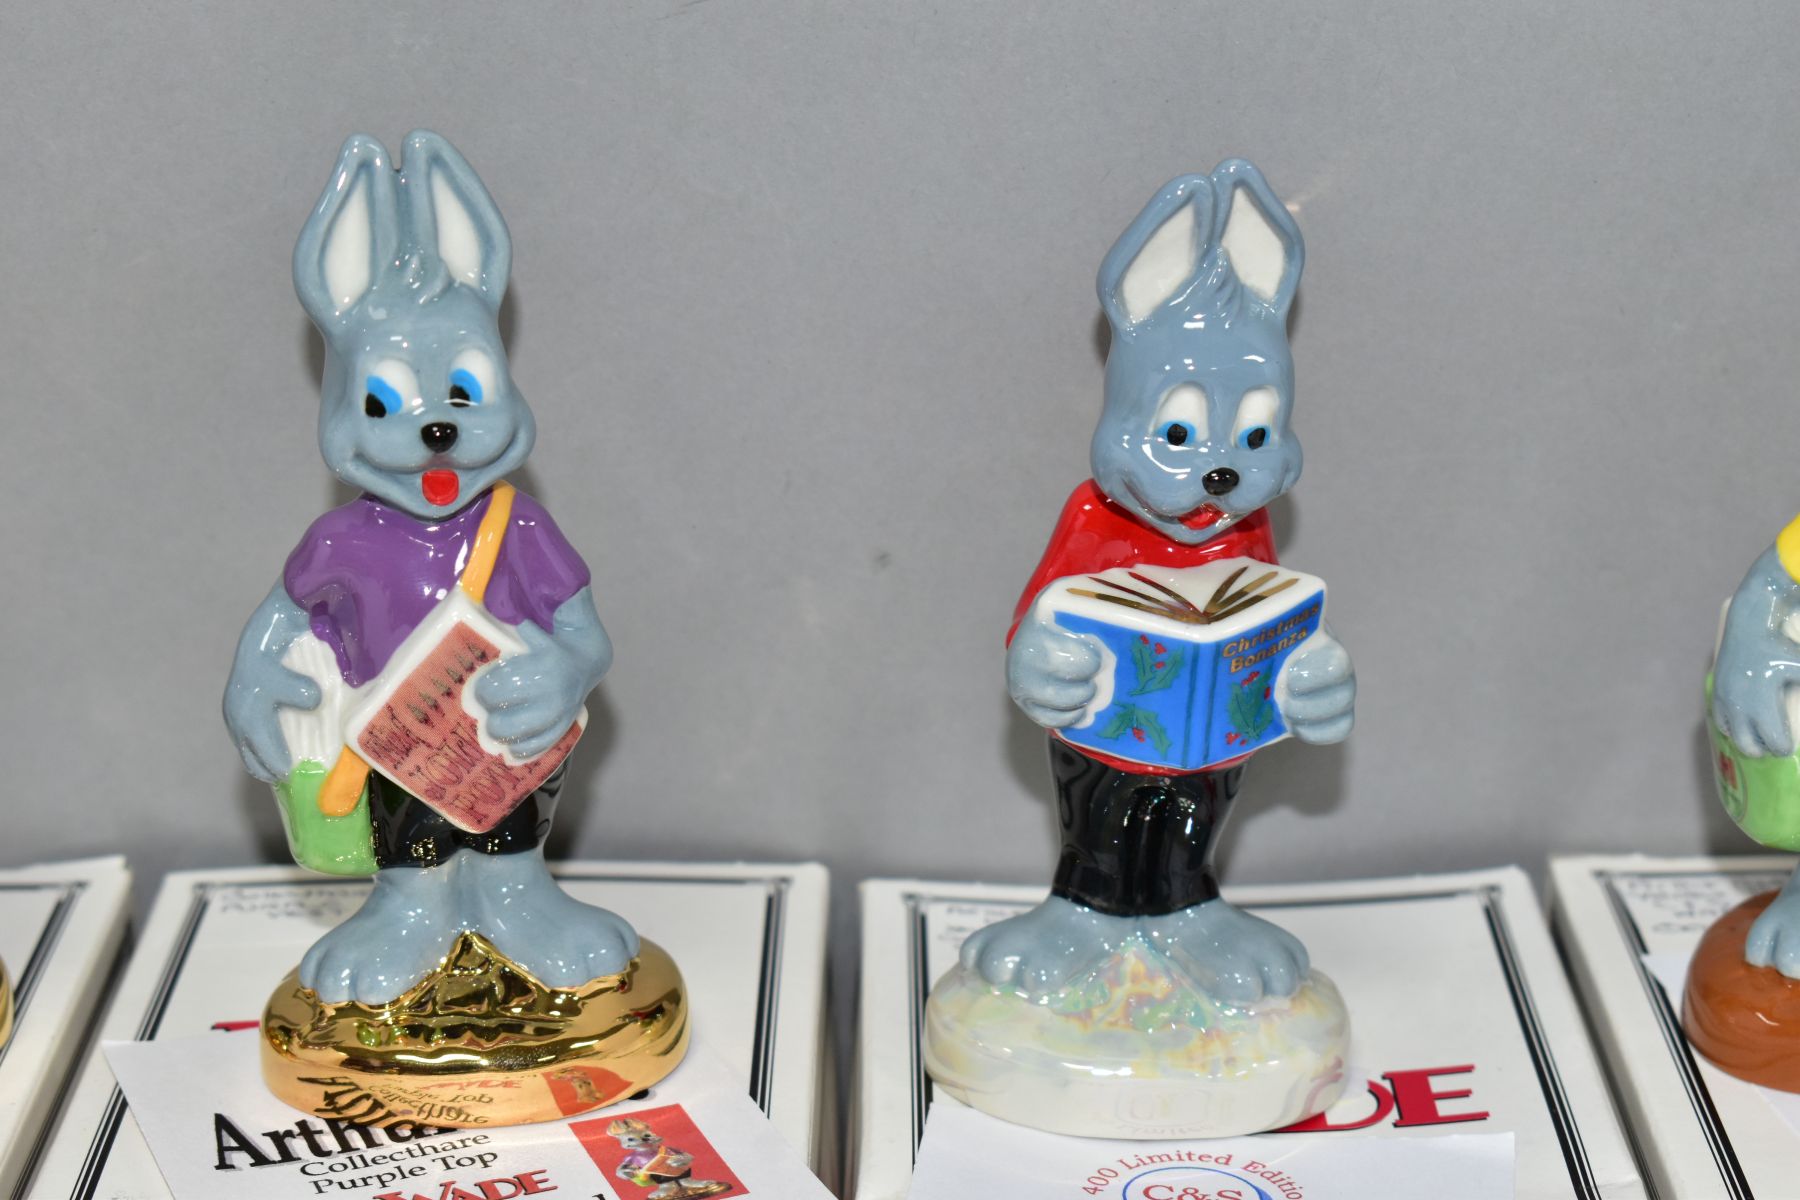 SIX BOXED LIMITED EDITION WADE ARTHUR HARE FIGURES FROM THE COLLECTHARE COLLECTIONS, comprising - Image 3 of 5